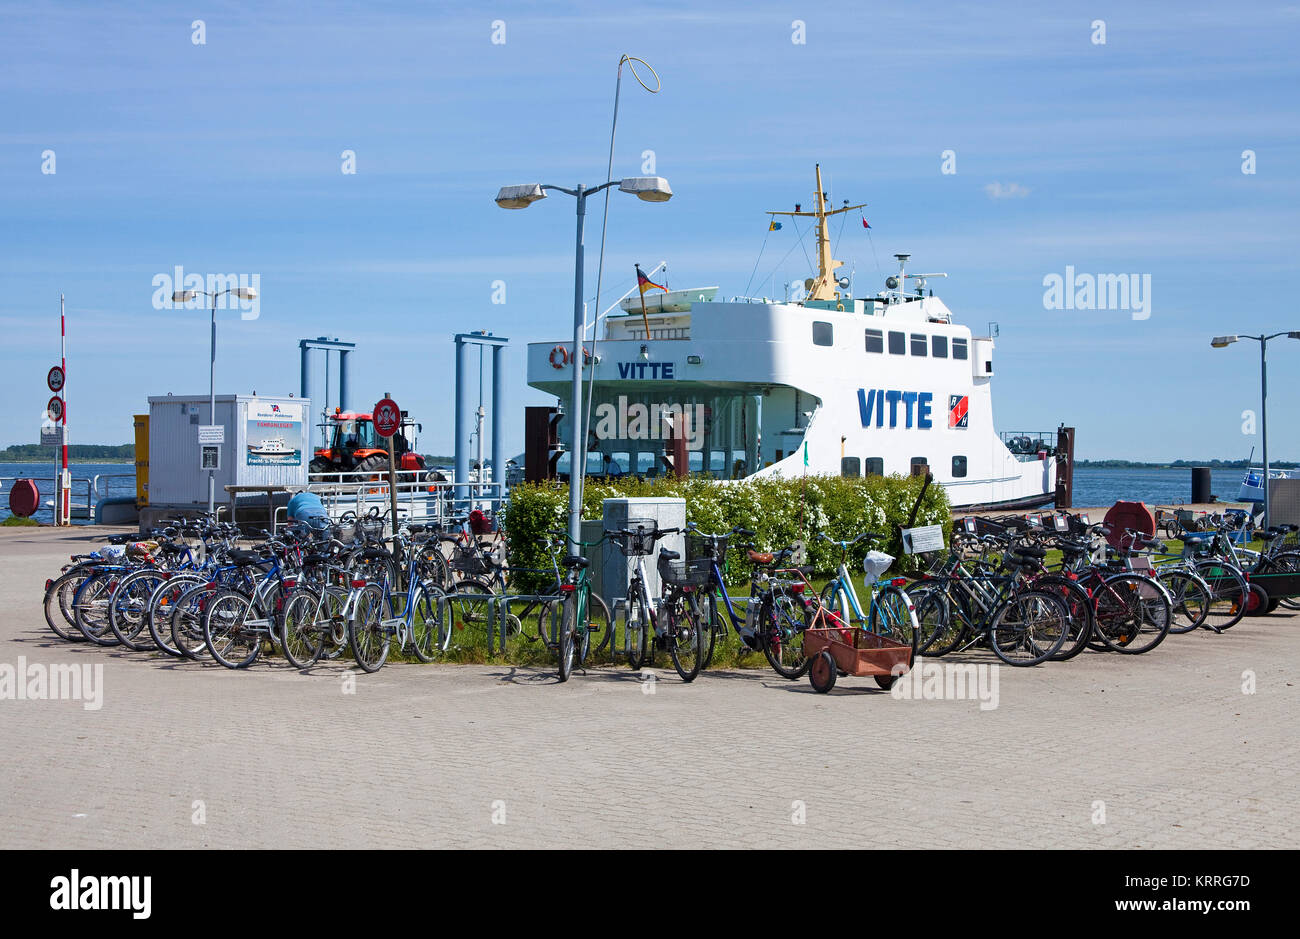 Ferry at the harbour of the village Vitte, island Hiddensee, Mecklenburg-Western Pomerania, Baltic Sea, Germany, Europe Stock Photo